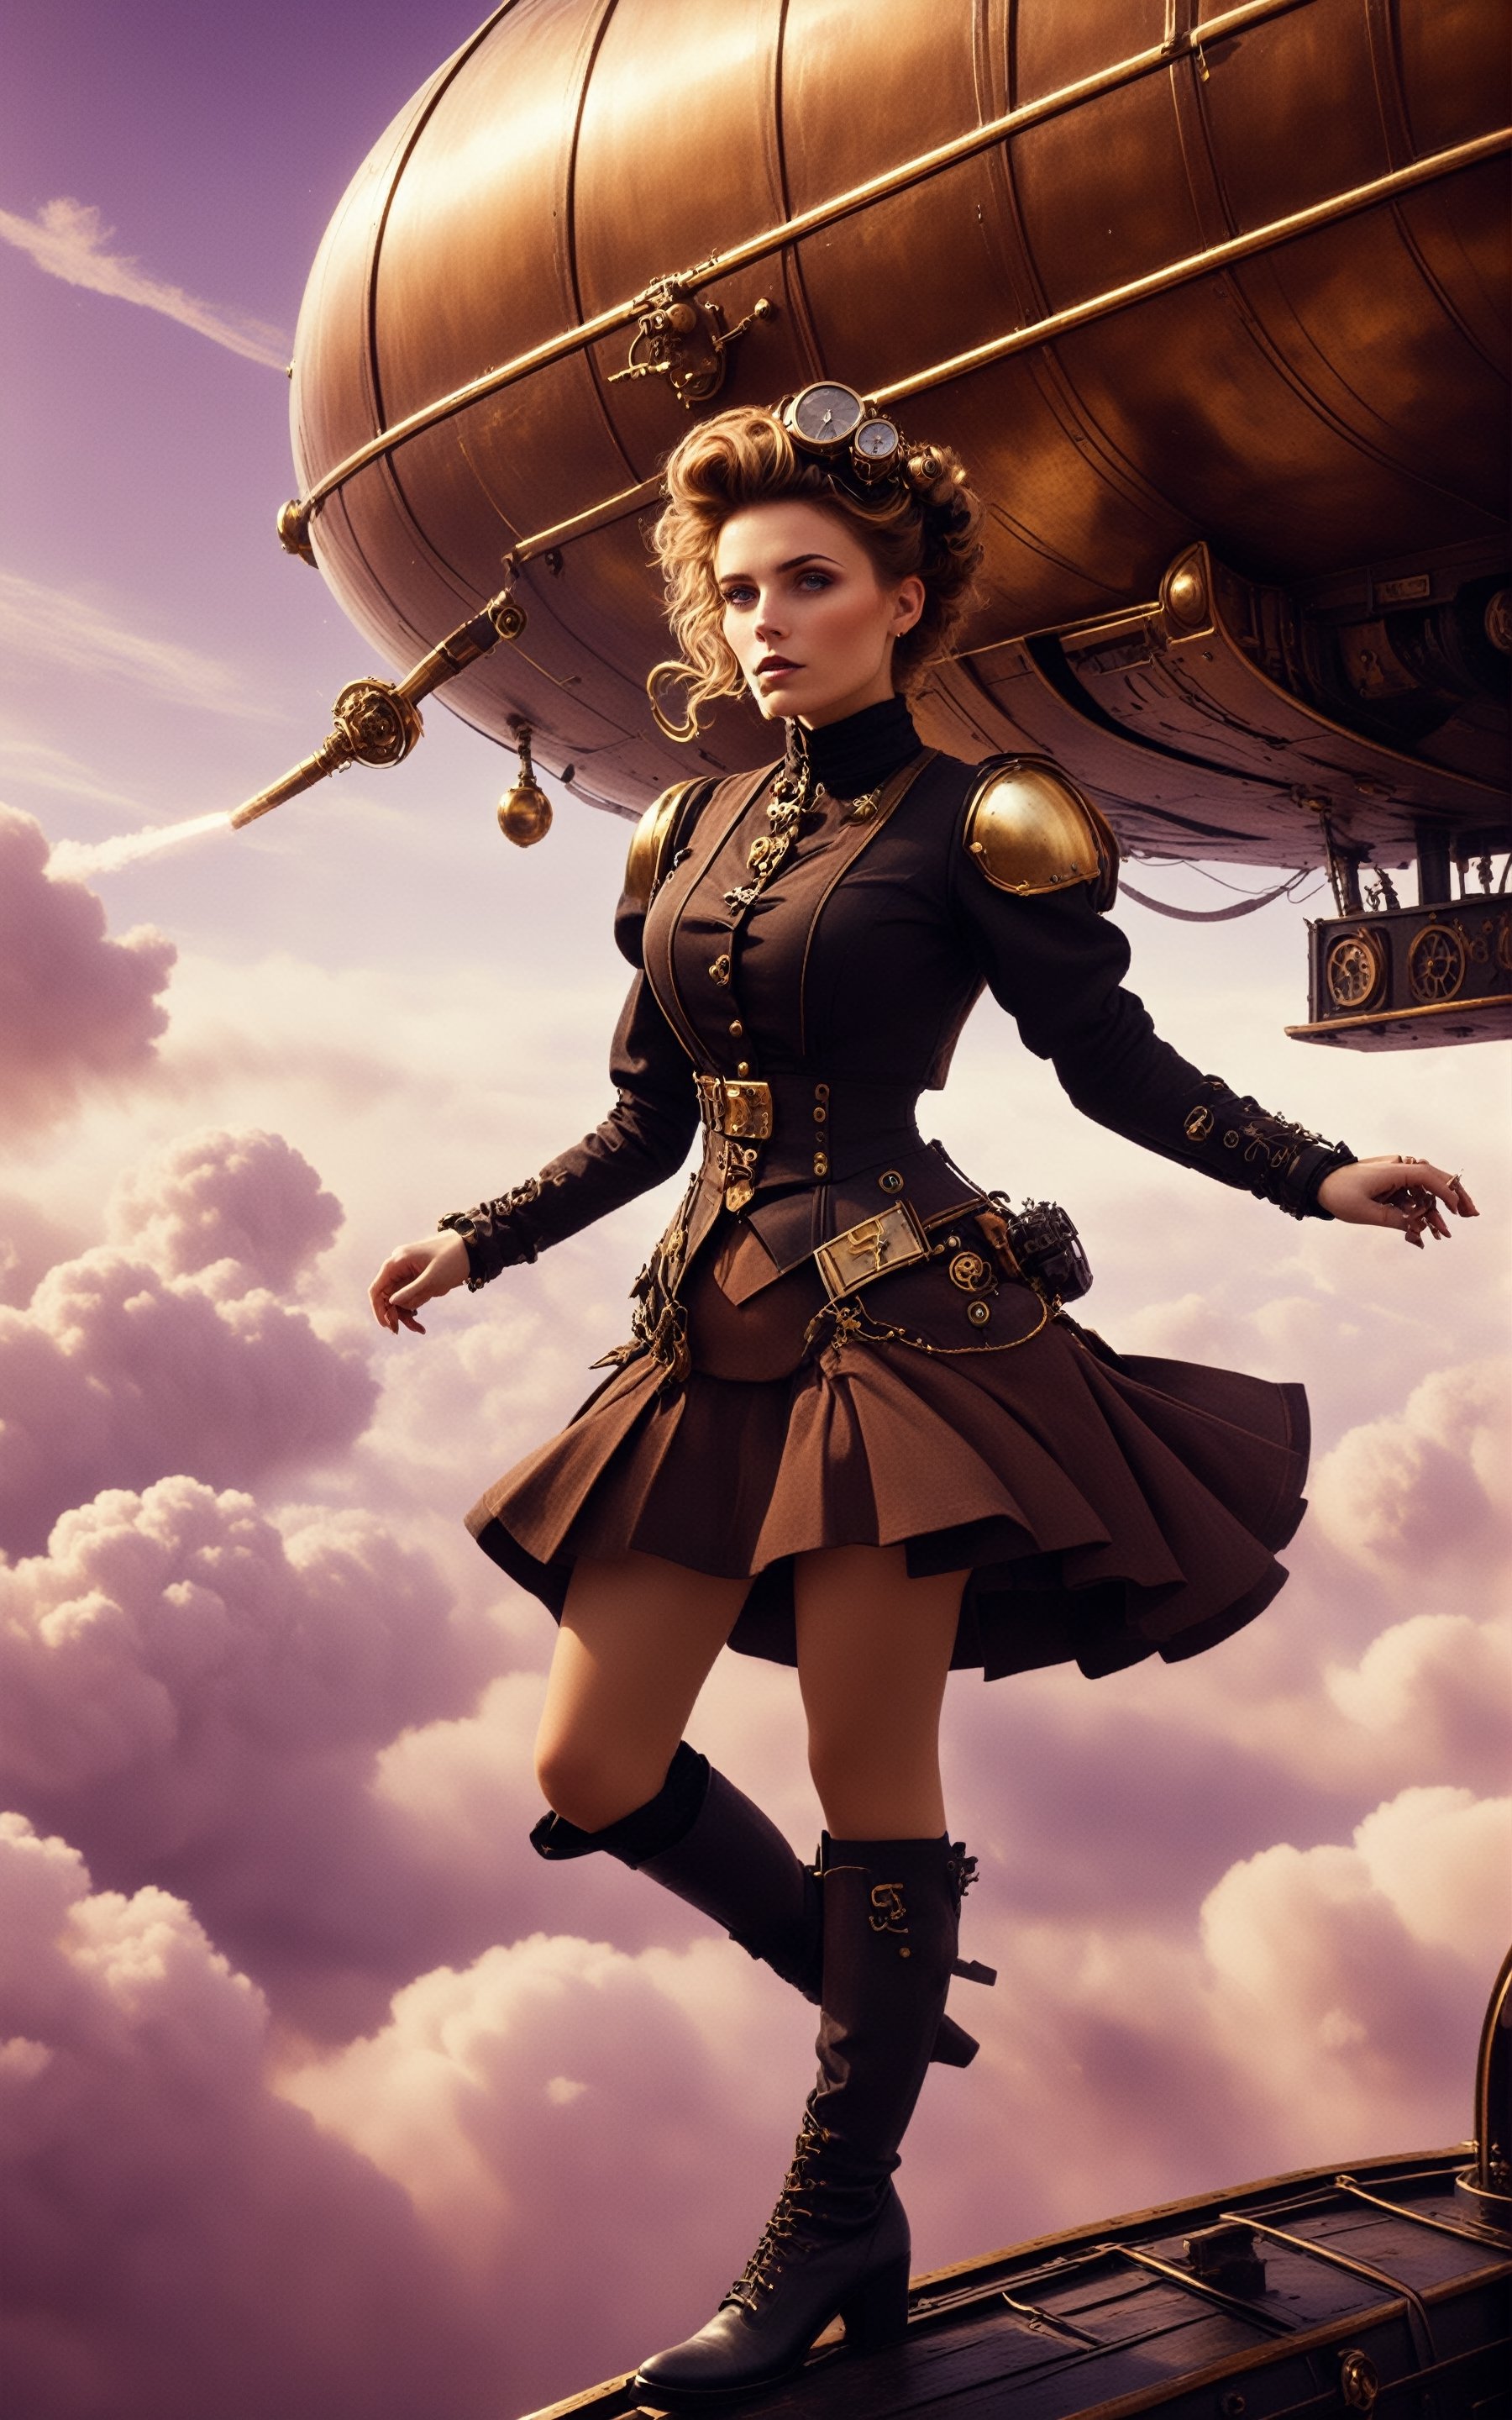 (style of [Cathleen McAllister|Ilya Kuvshinov|Loish|Daniela Uhlig|Ross Tran]:0.7), (solo-focus, cinematic photoshoot of perfect seductive young woman riding Steampunk Airship:1.3), majestic steampunk airship adorned with intricate brass gears and glowing steam vents, navigating through a sky streaked with amber and violet hues, amidst floating islands and surreal cloud formations.
